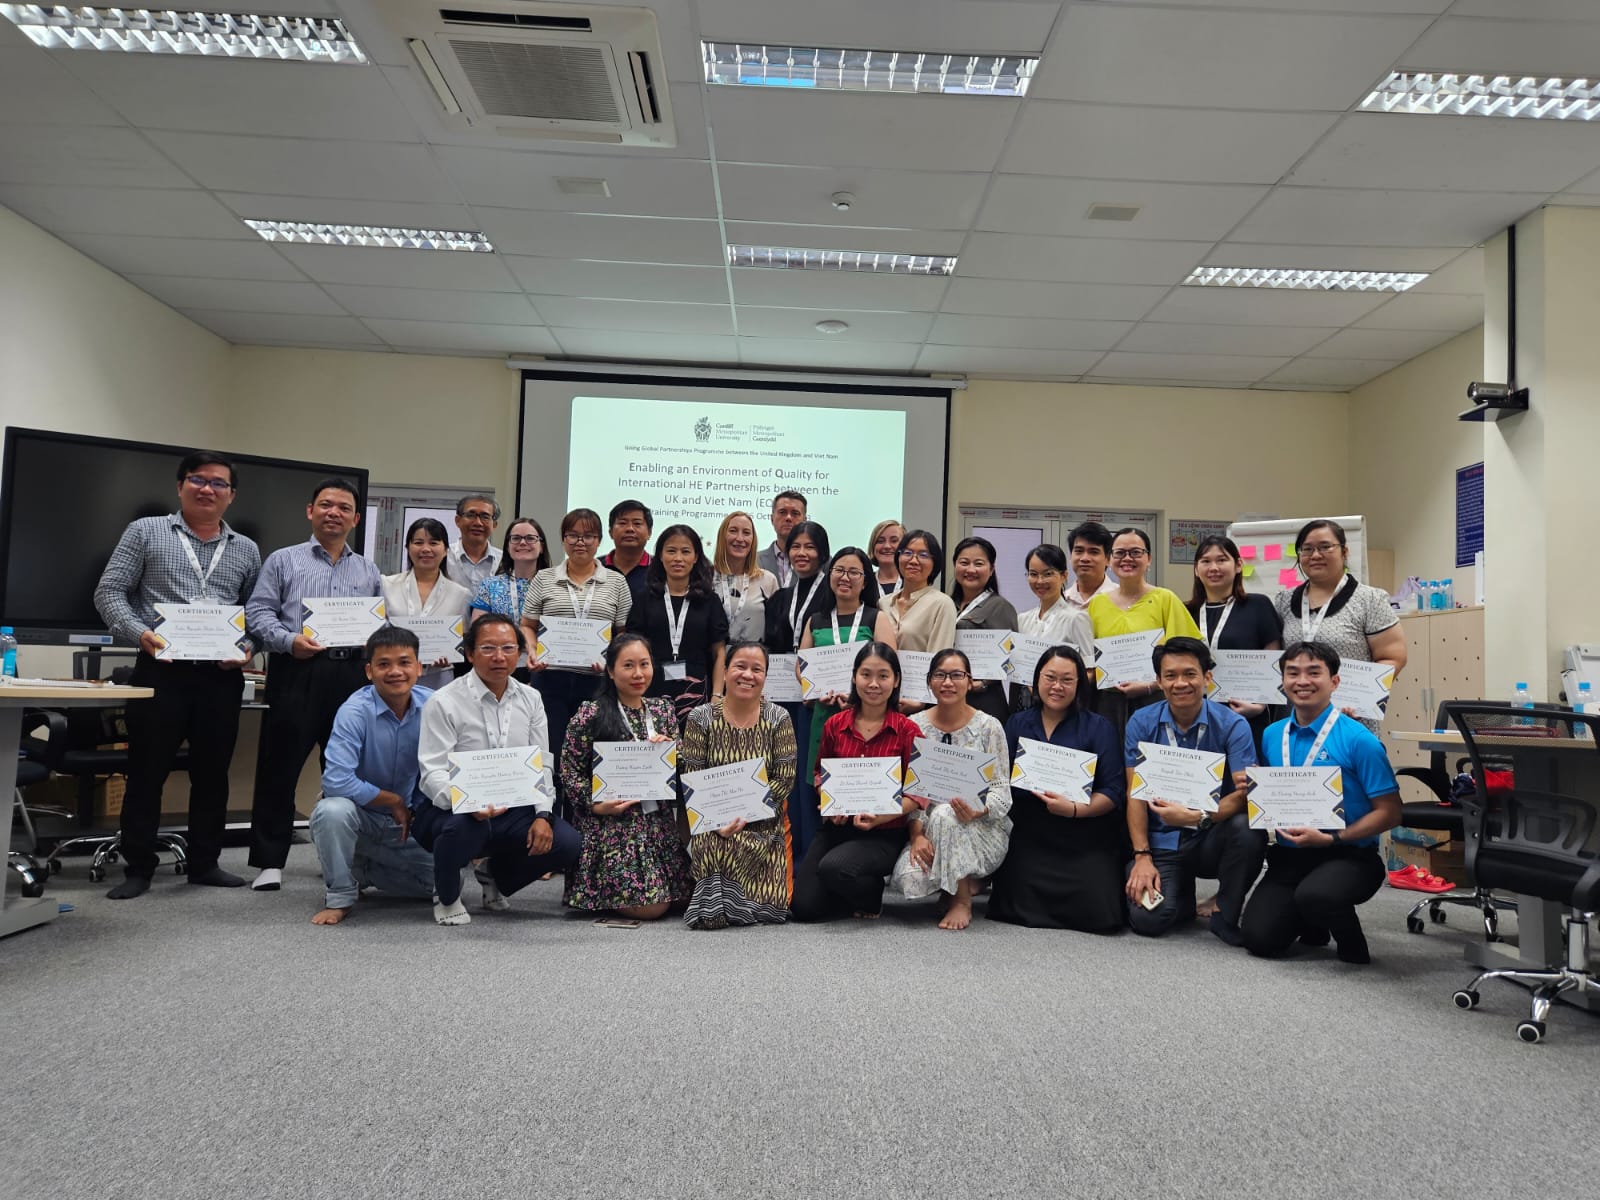 Training staff and class taking a group photograph with their training certificates